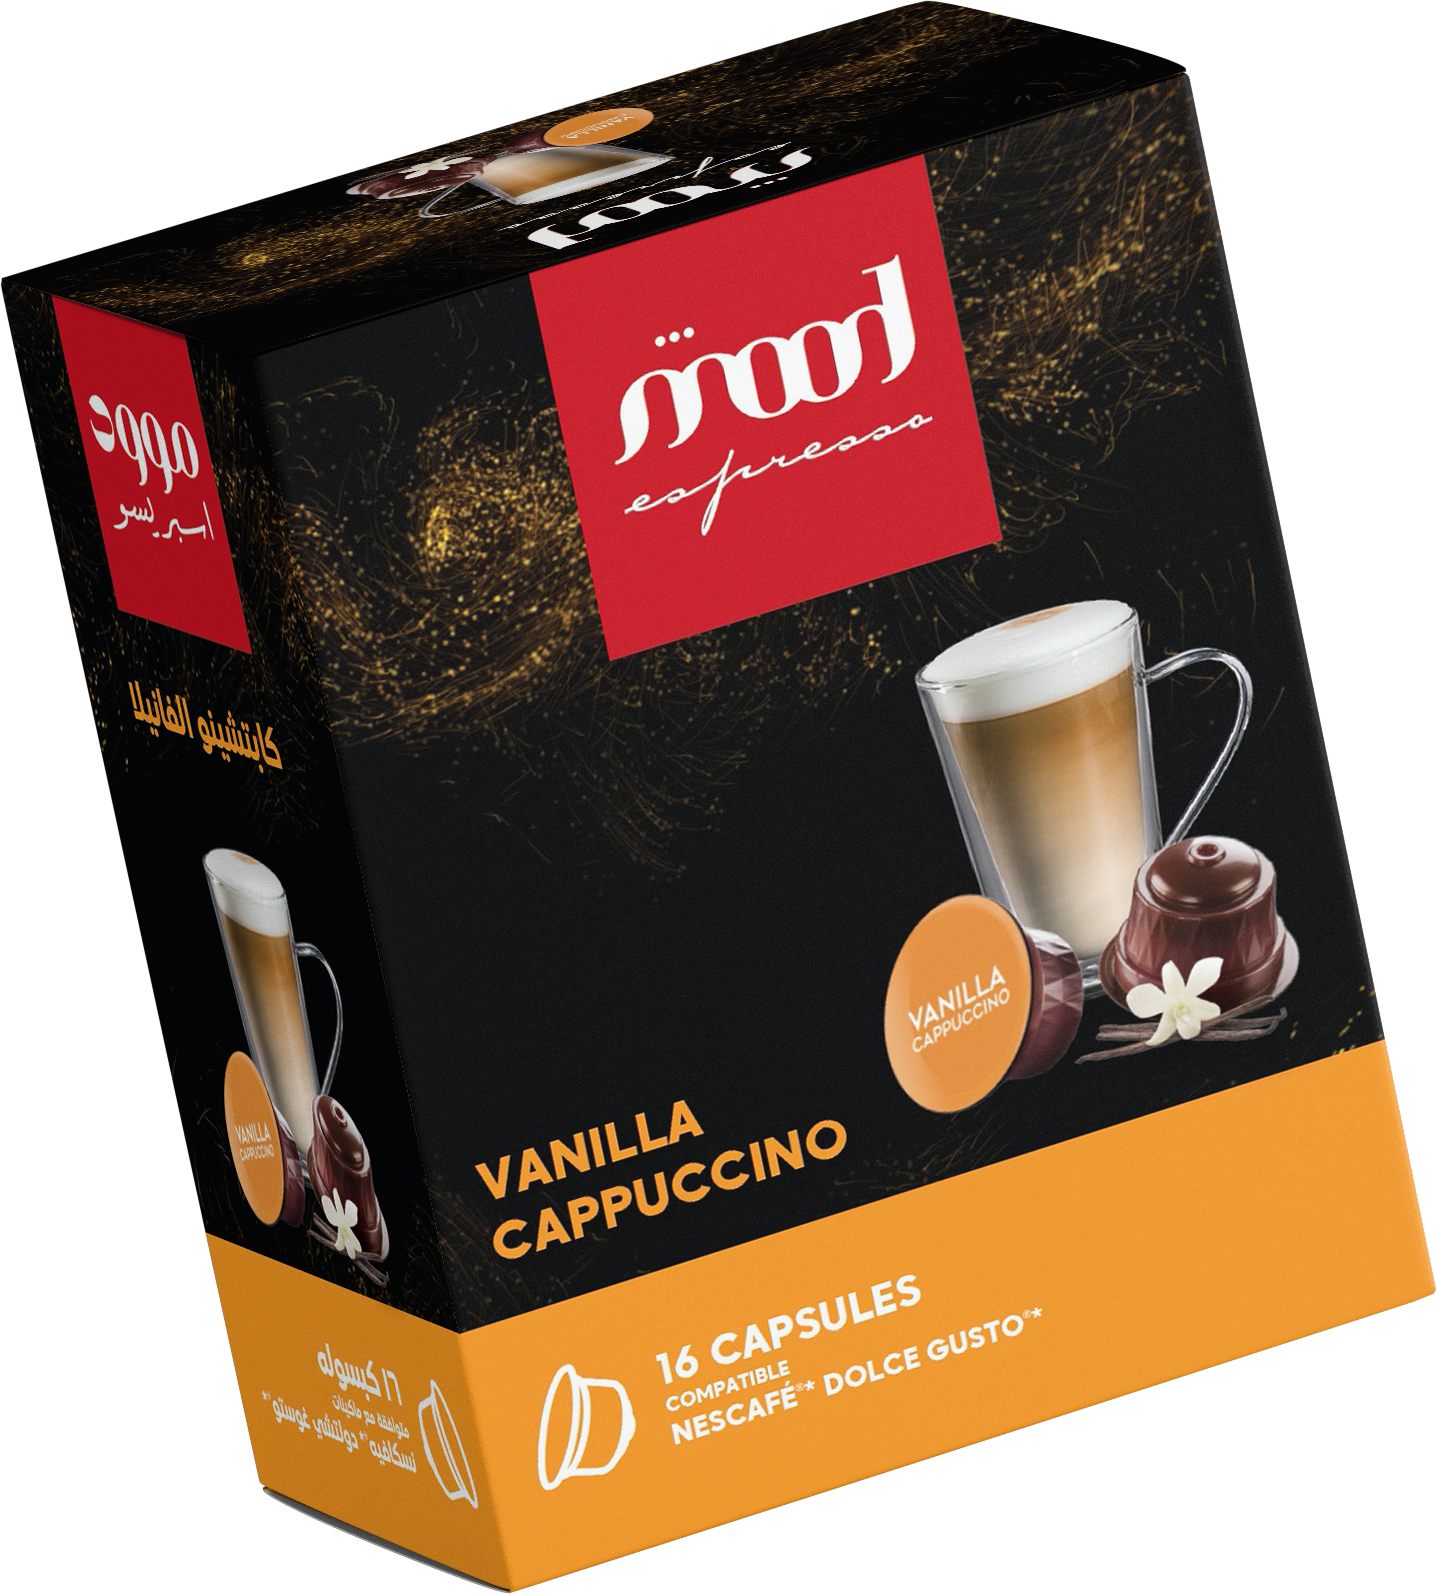 mood espresso - Dolce gusto nescafe offer bundle -pack of eight-pack of 8-dolce gusto Discovery pack-vanilla Cappuccino